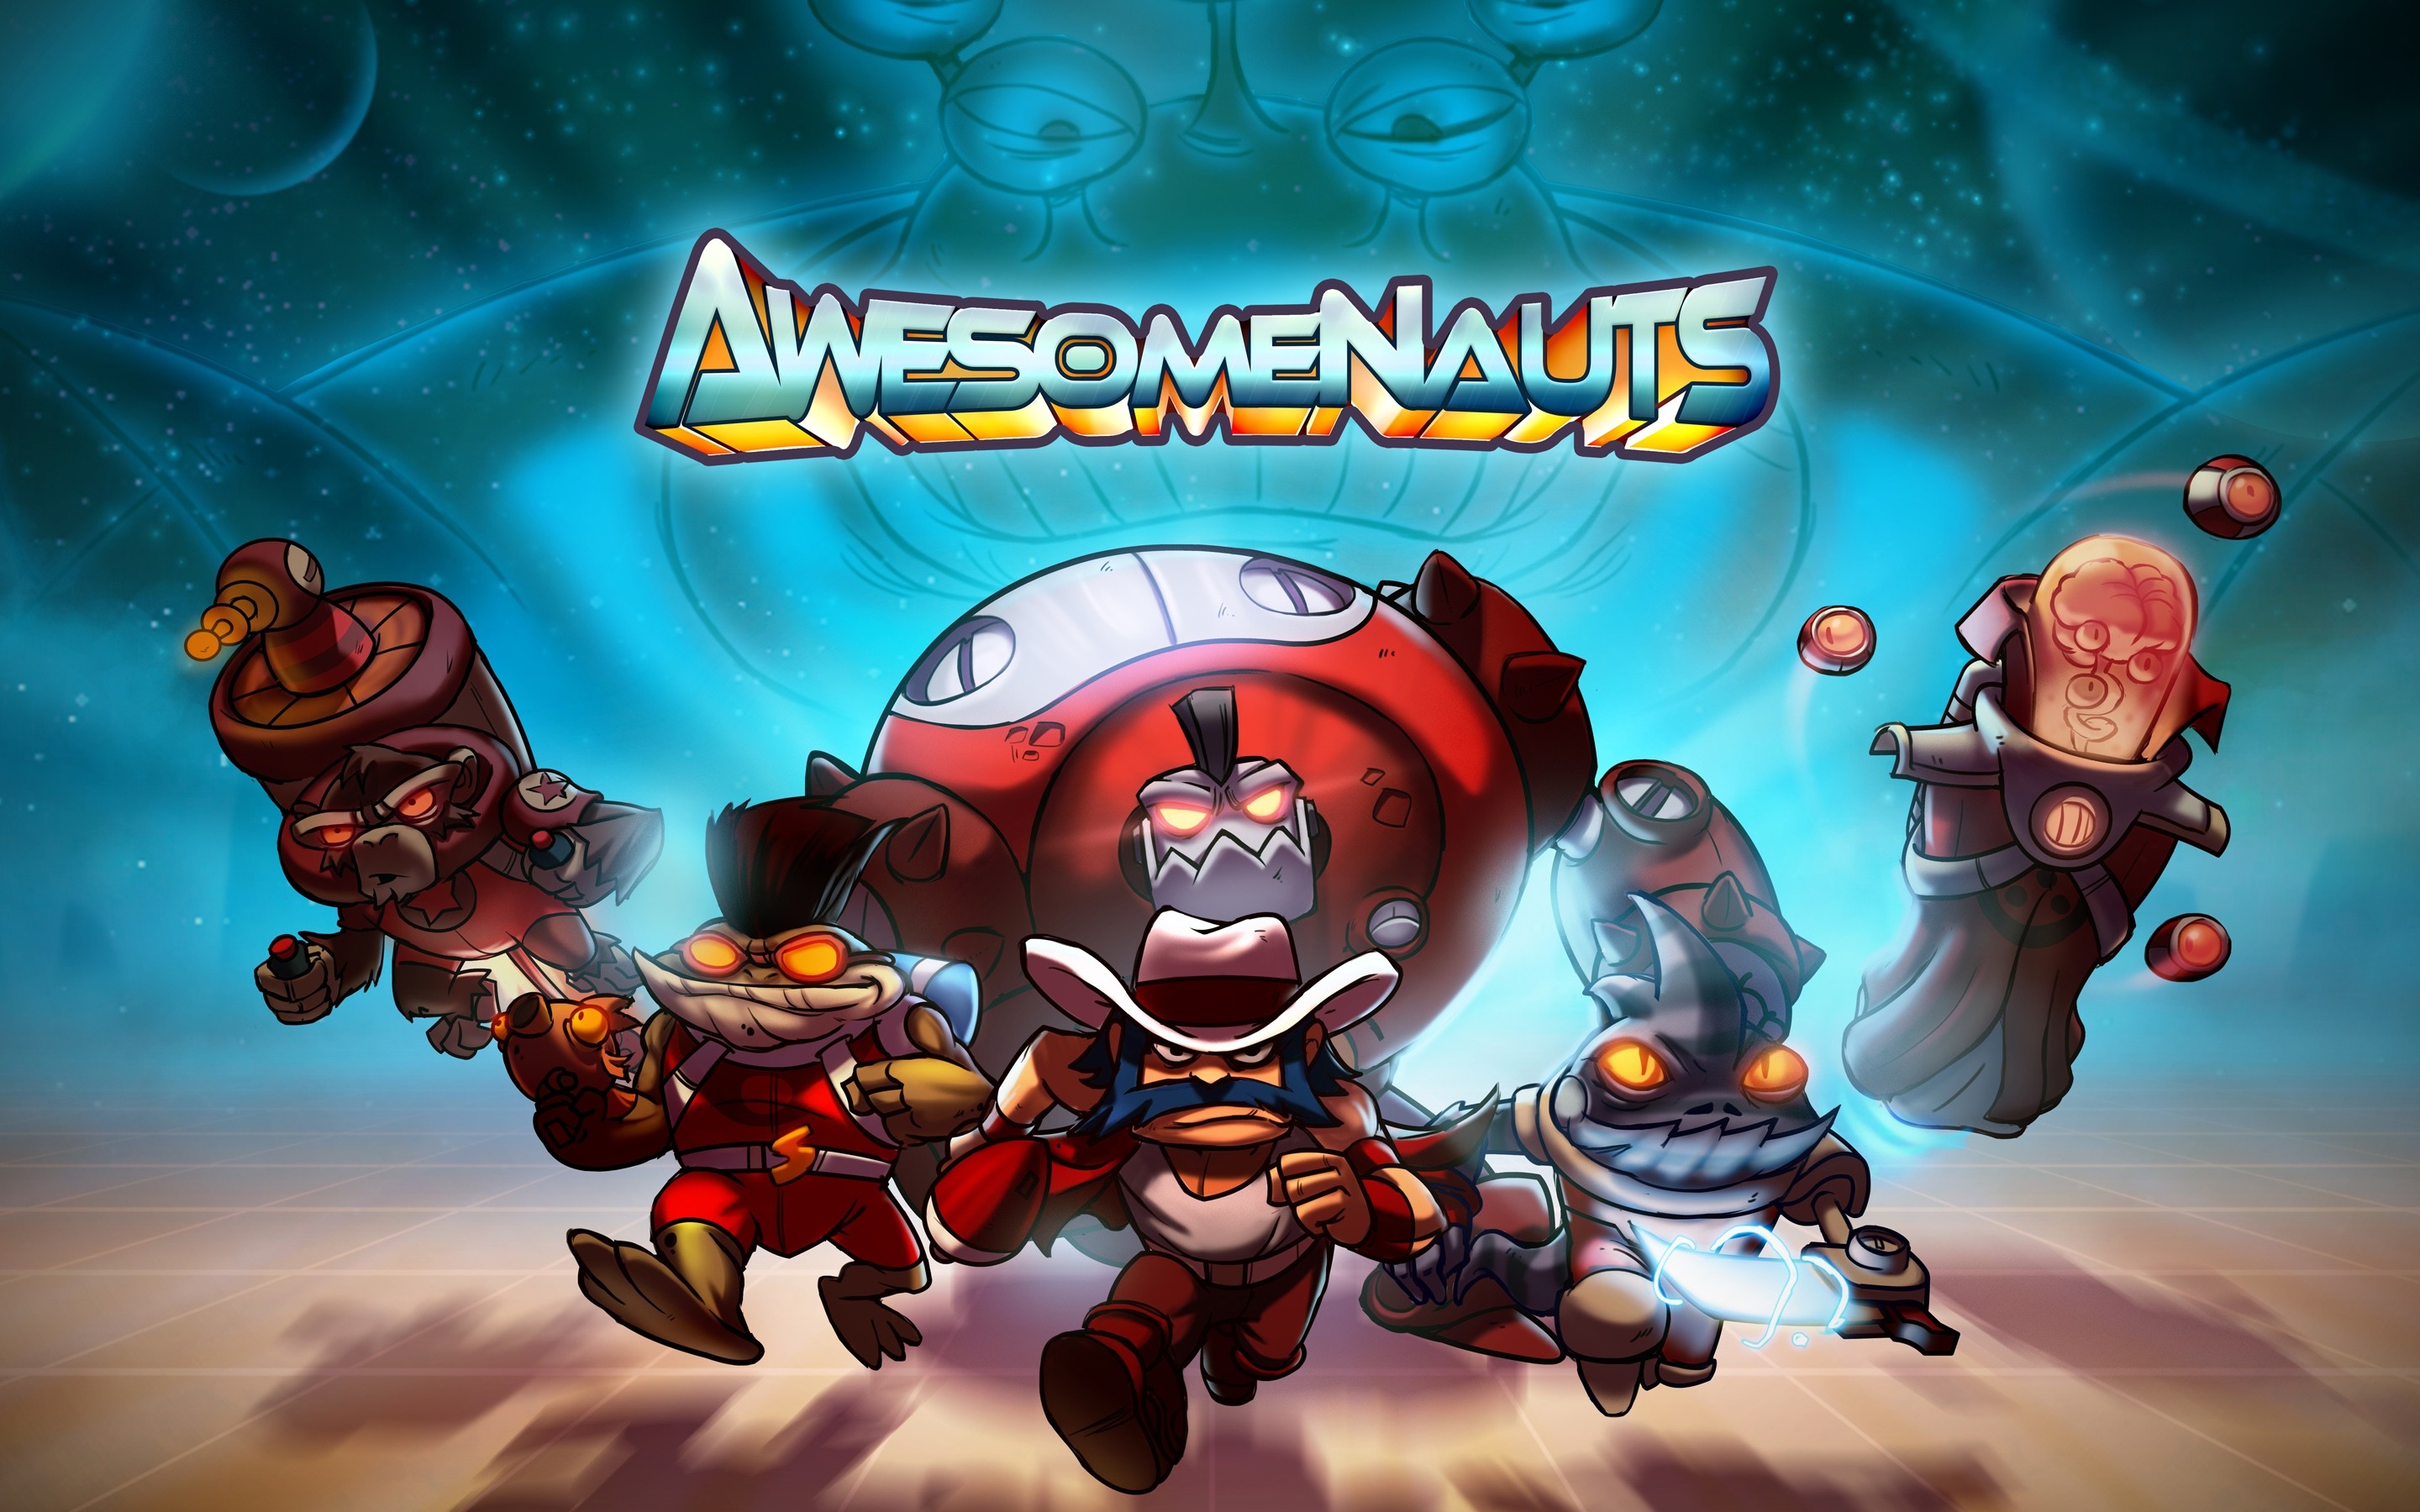 2880x1800 Awesomenauts Video Game Wallpapers, HQFX Pictures